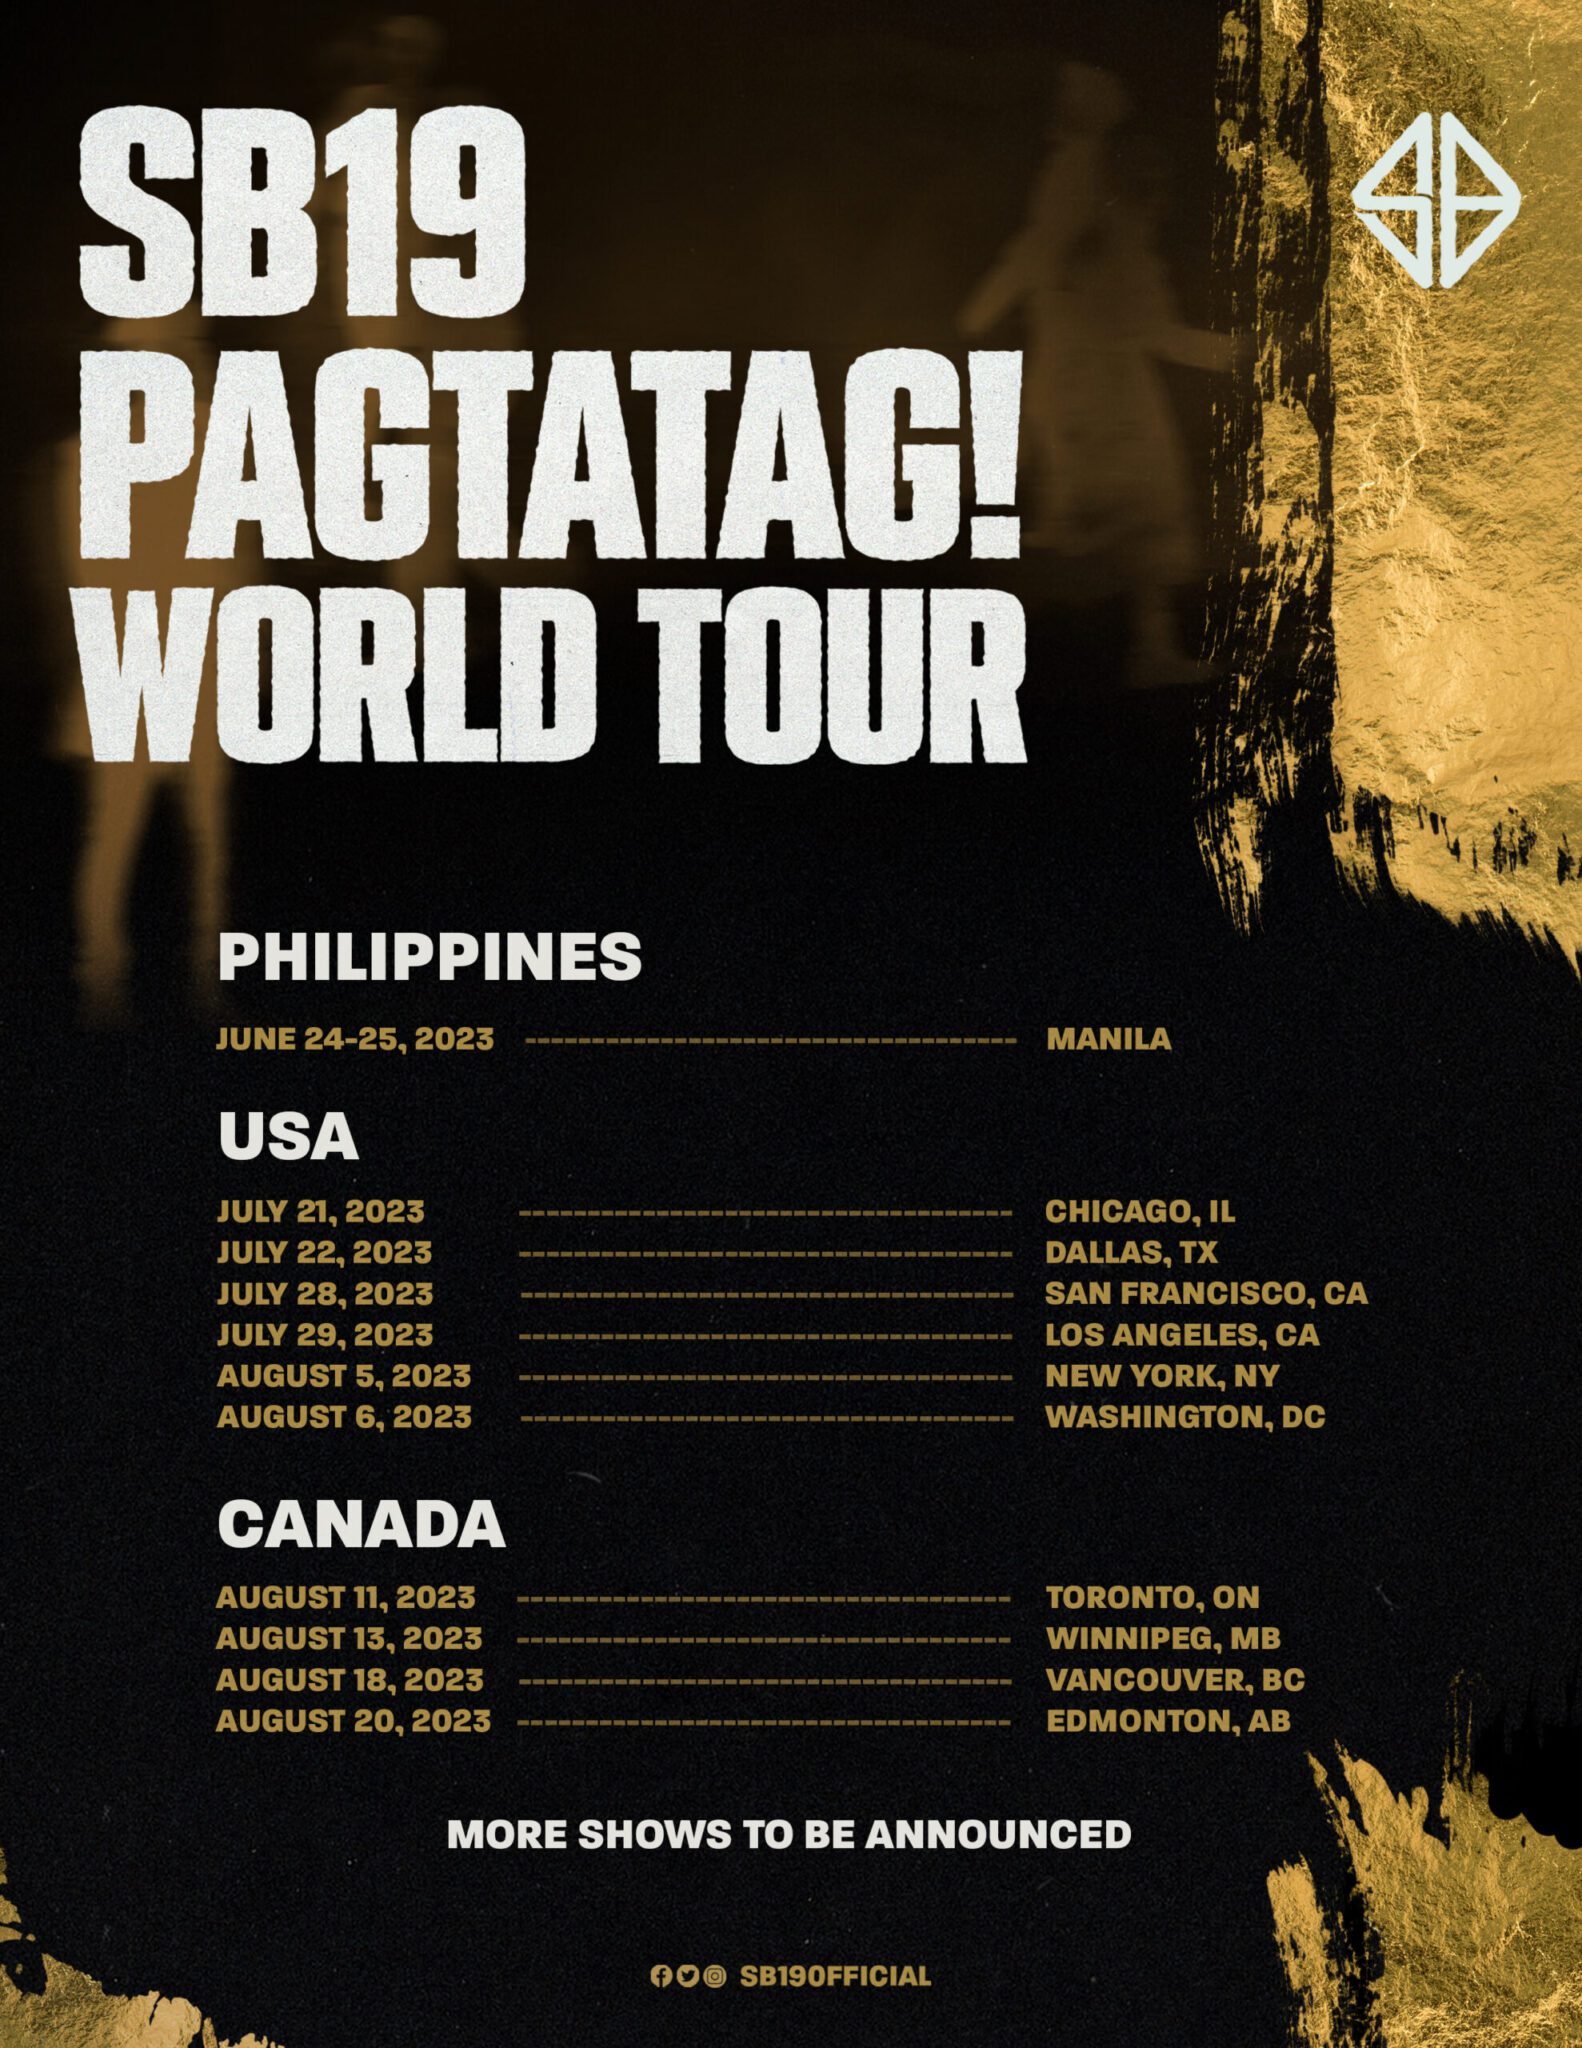 pagtatag world tour dates